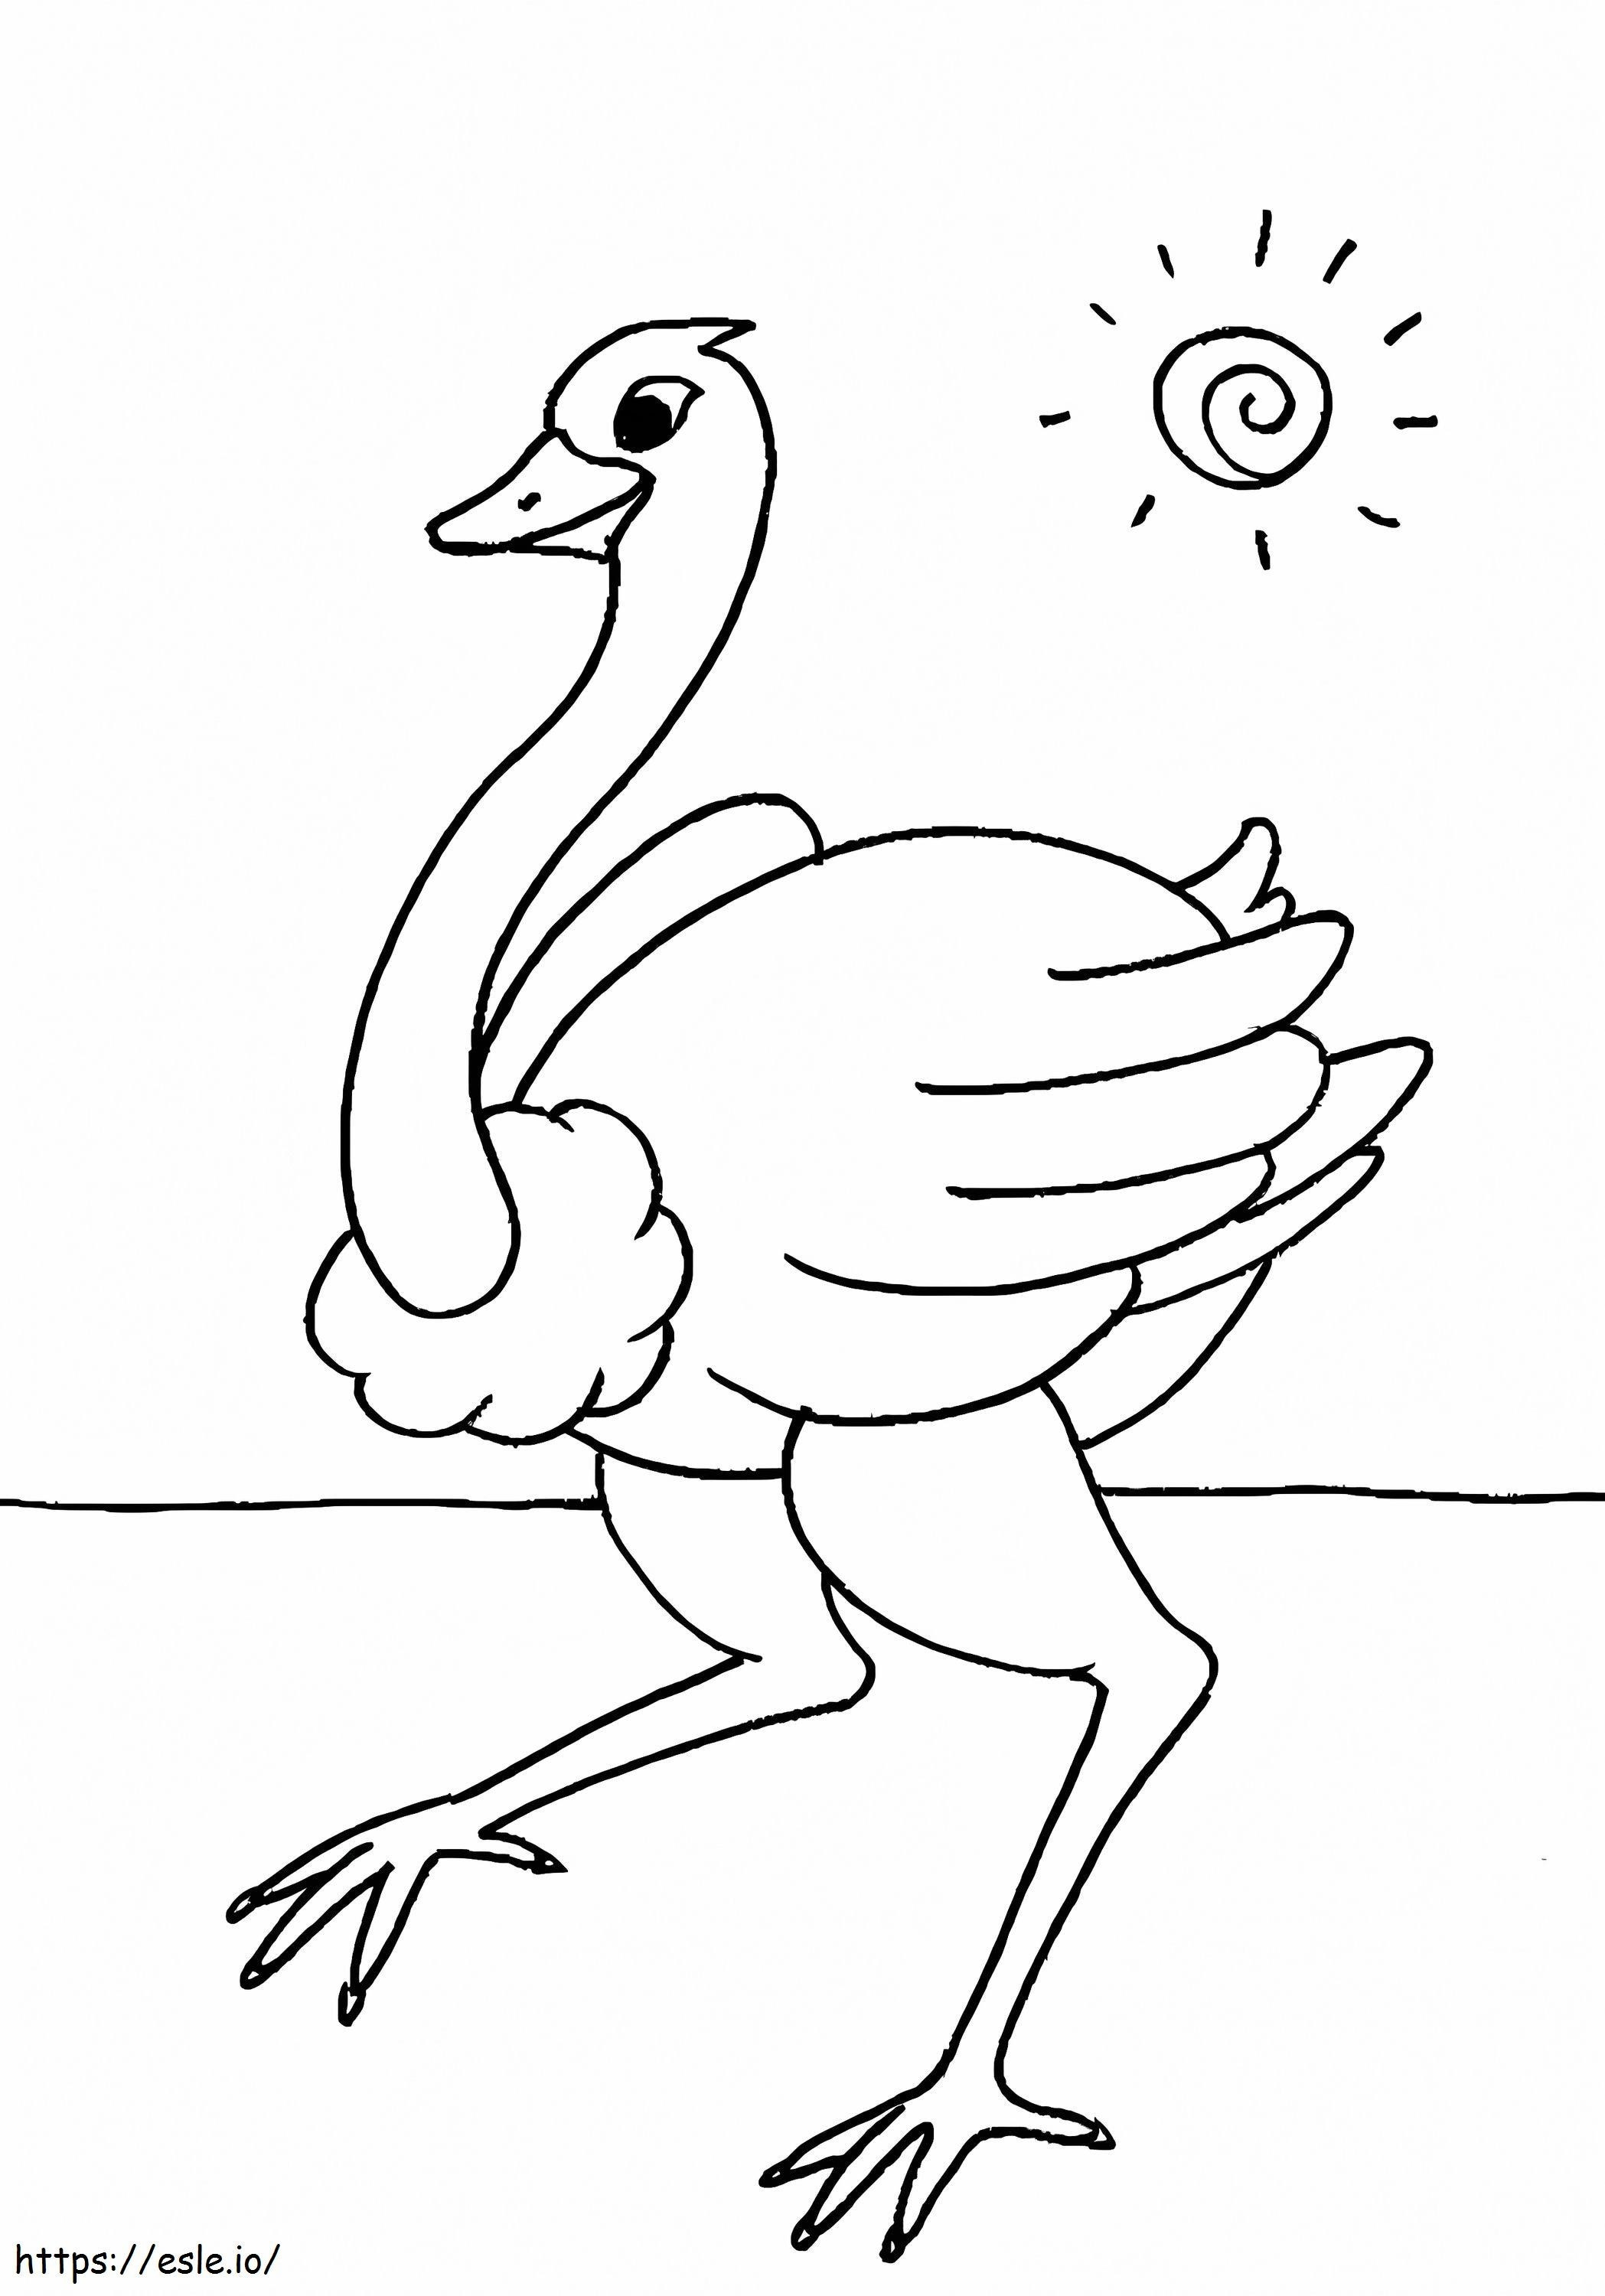 Ostrich And Sun coloring page